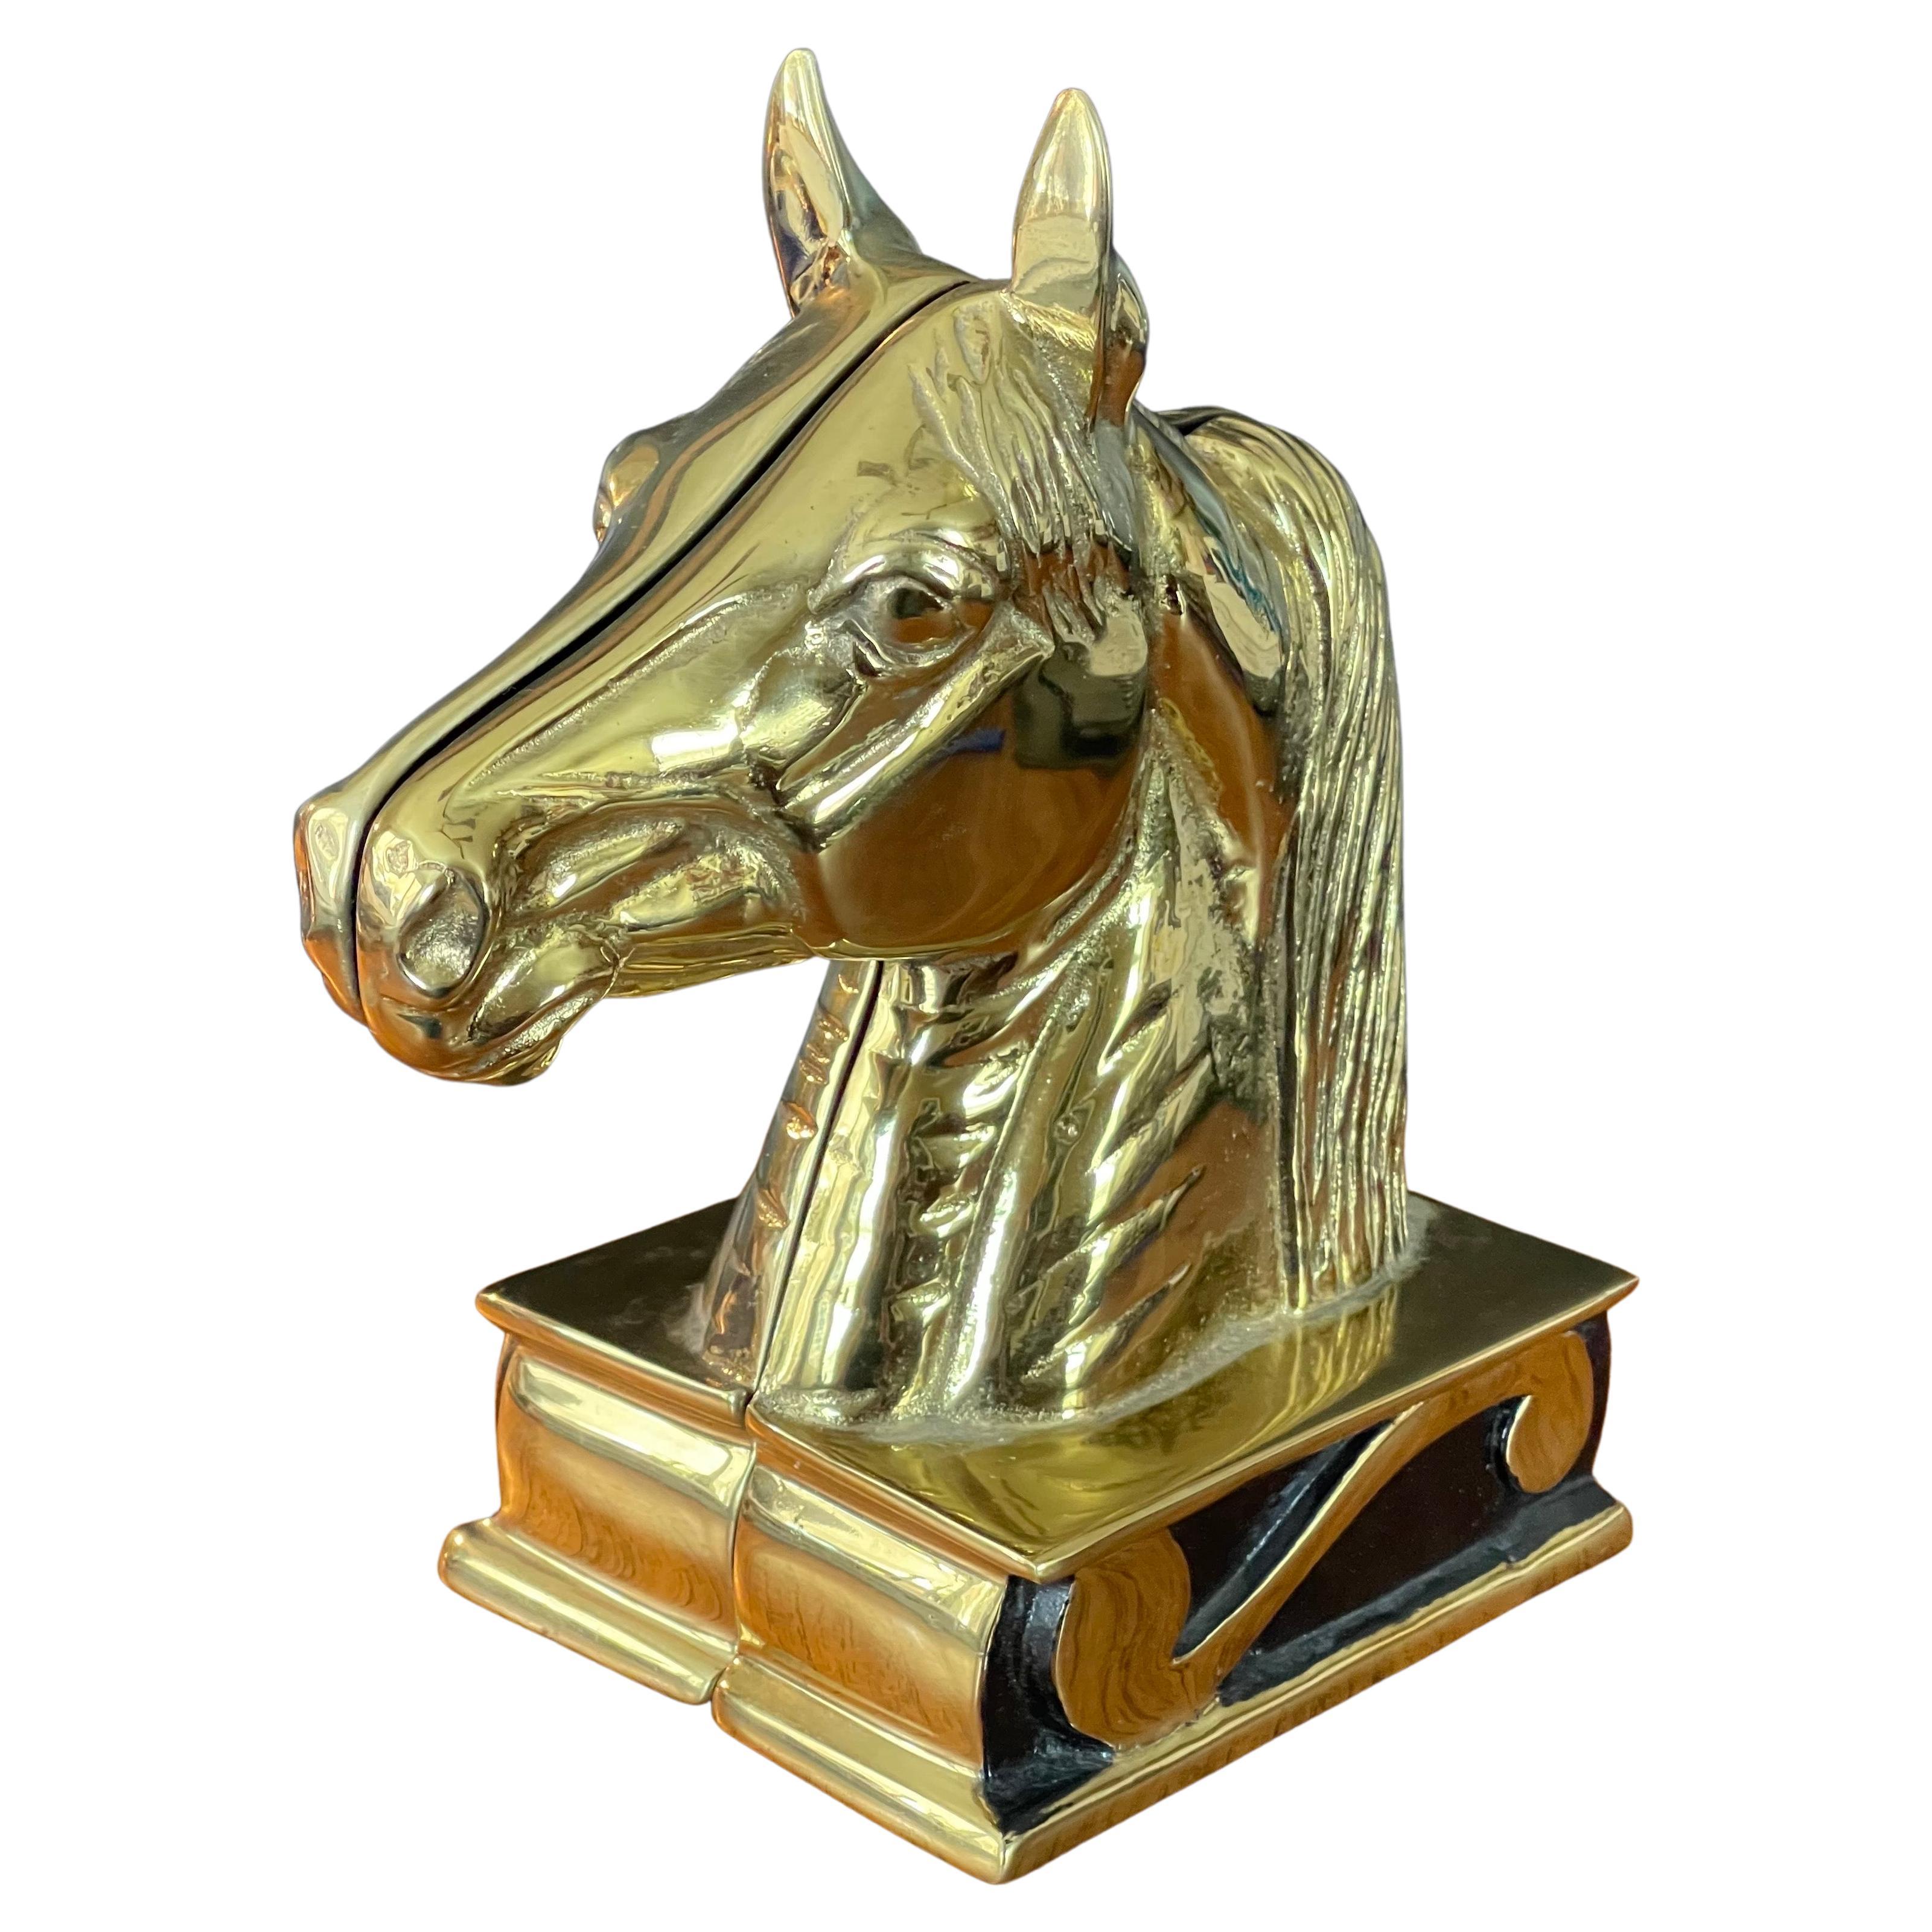 Pair of Brass "The Stallion" Horse Head Bookends by Virginia Metalcrafters